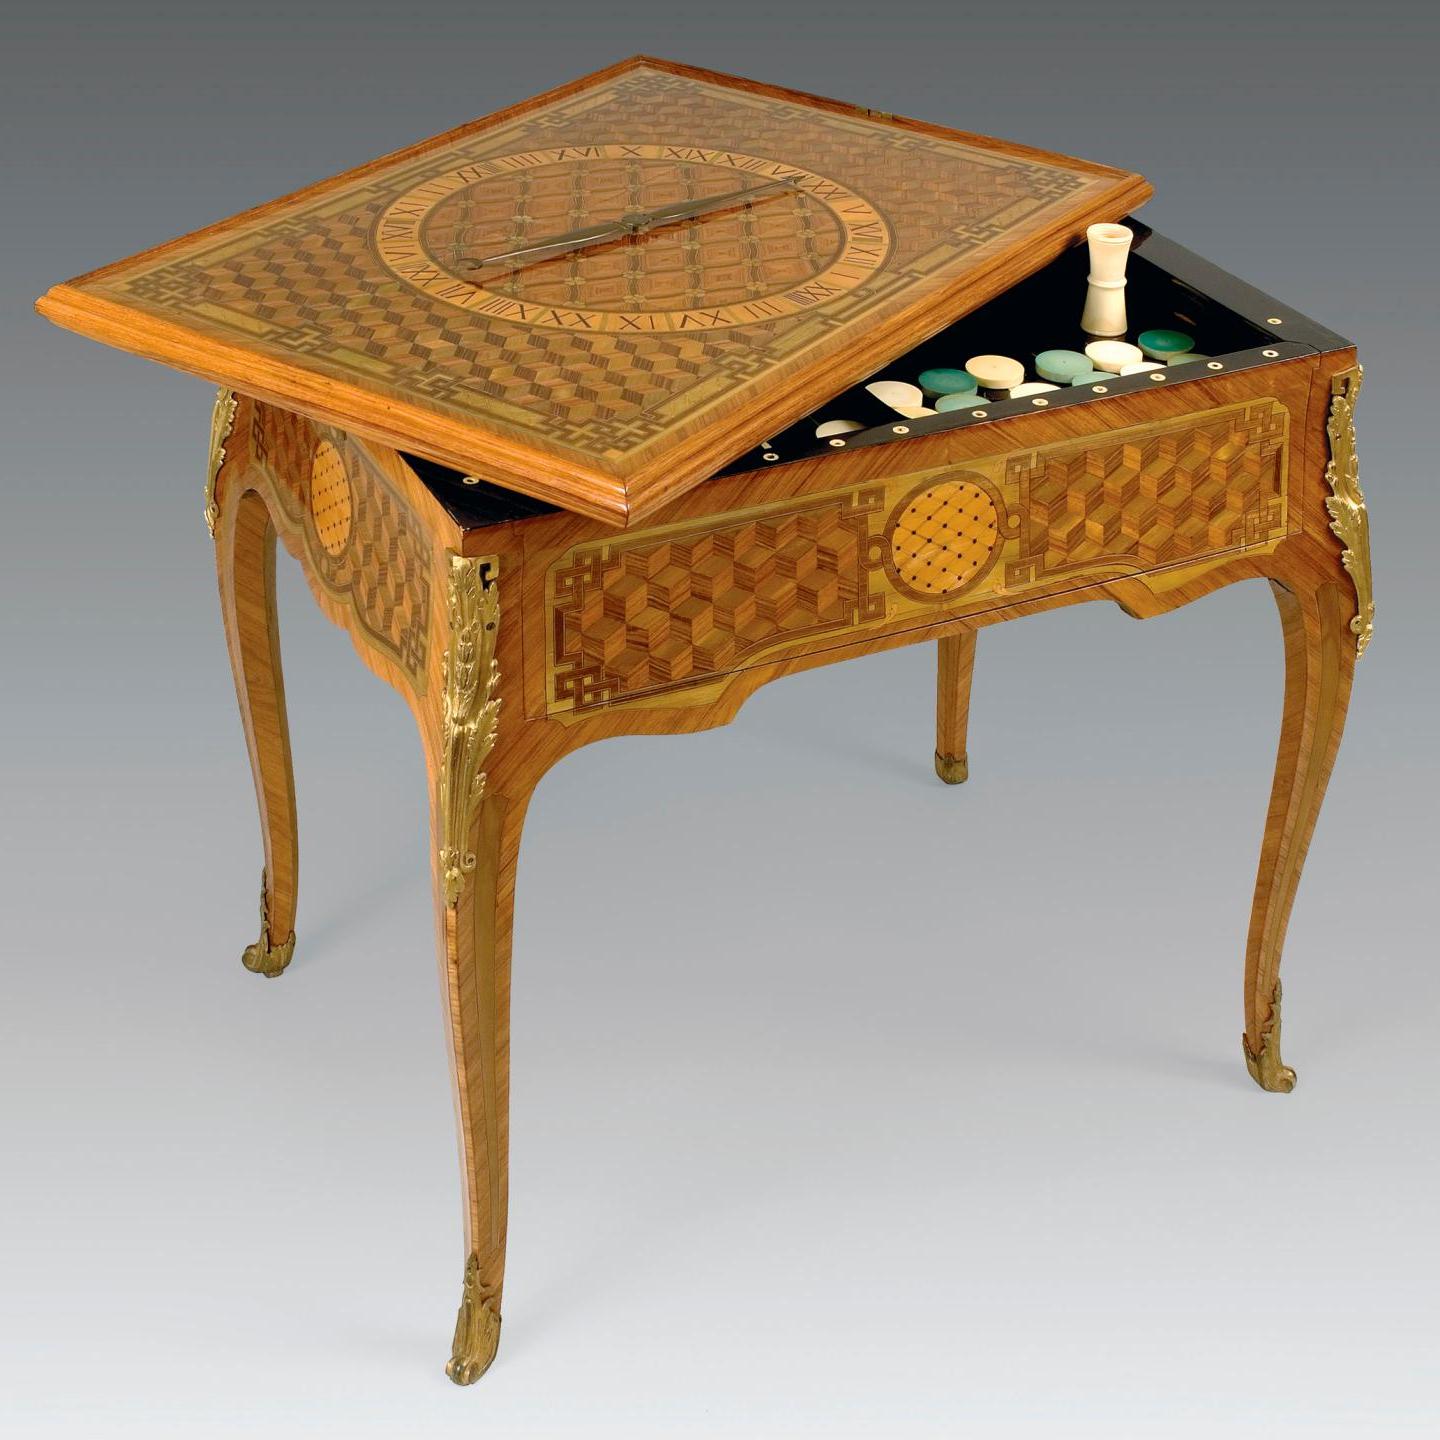 Art Price Index: Gaming Tables - Market Trends